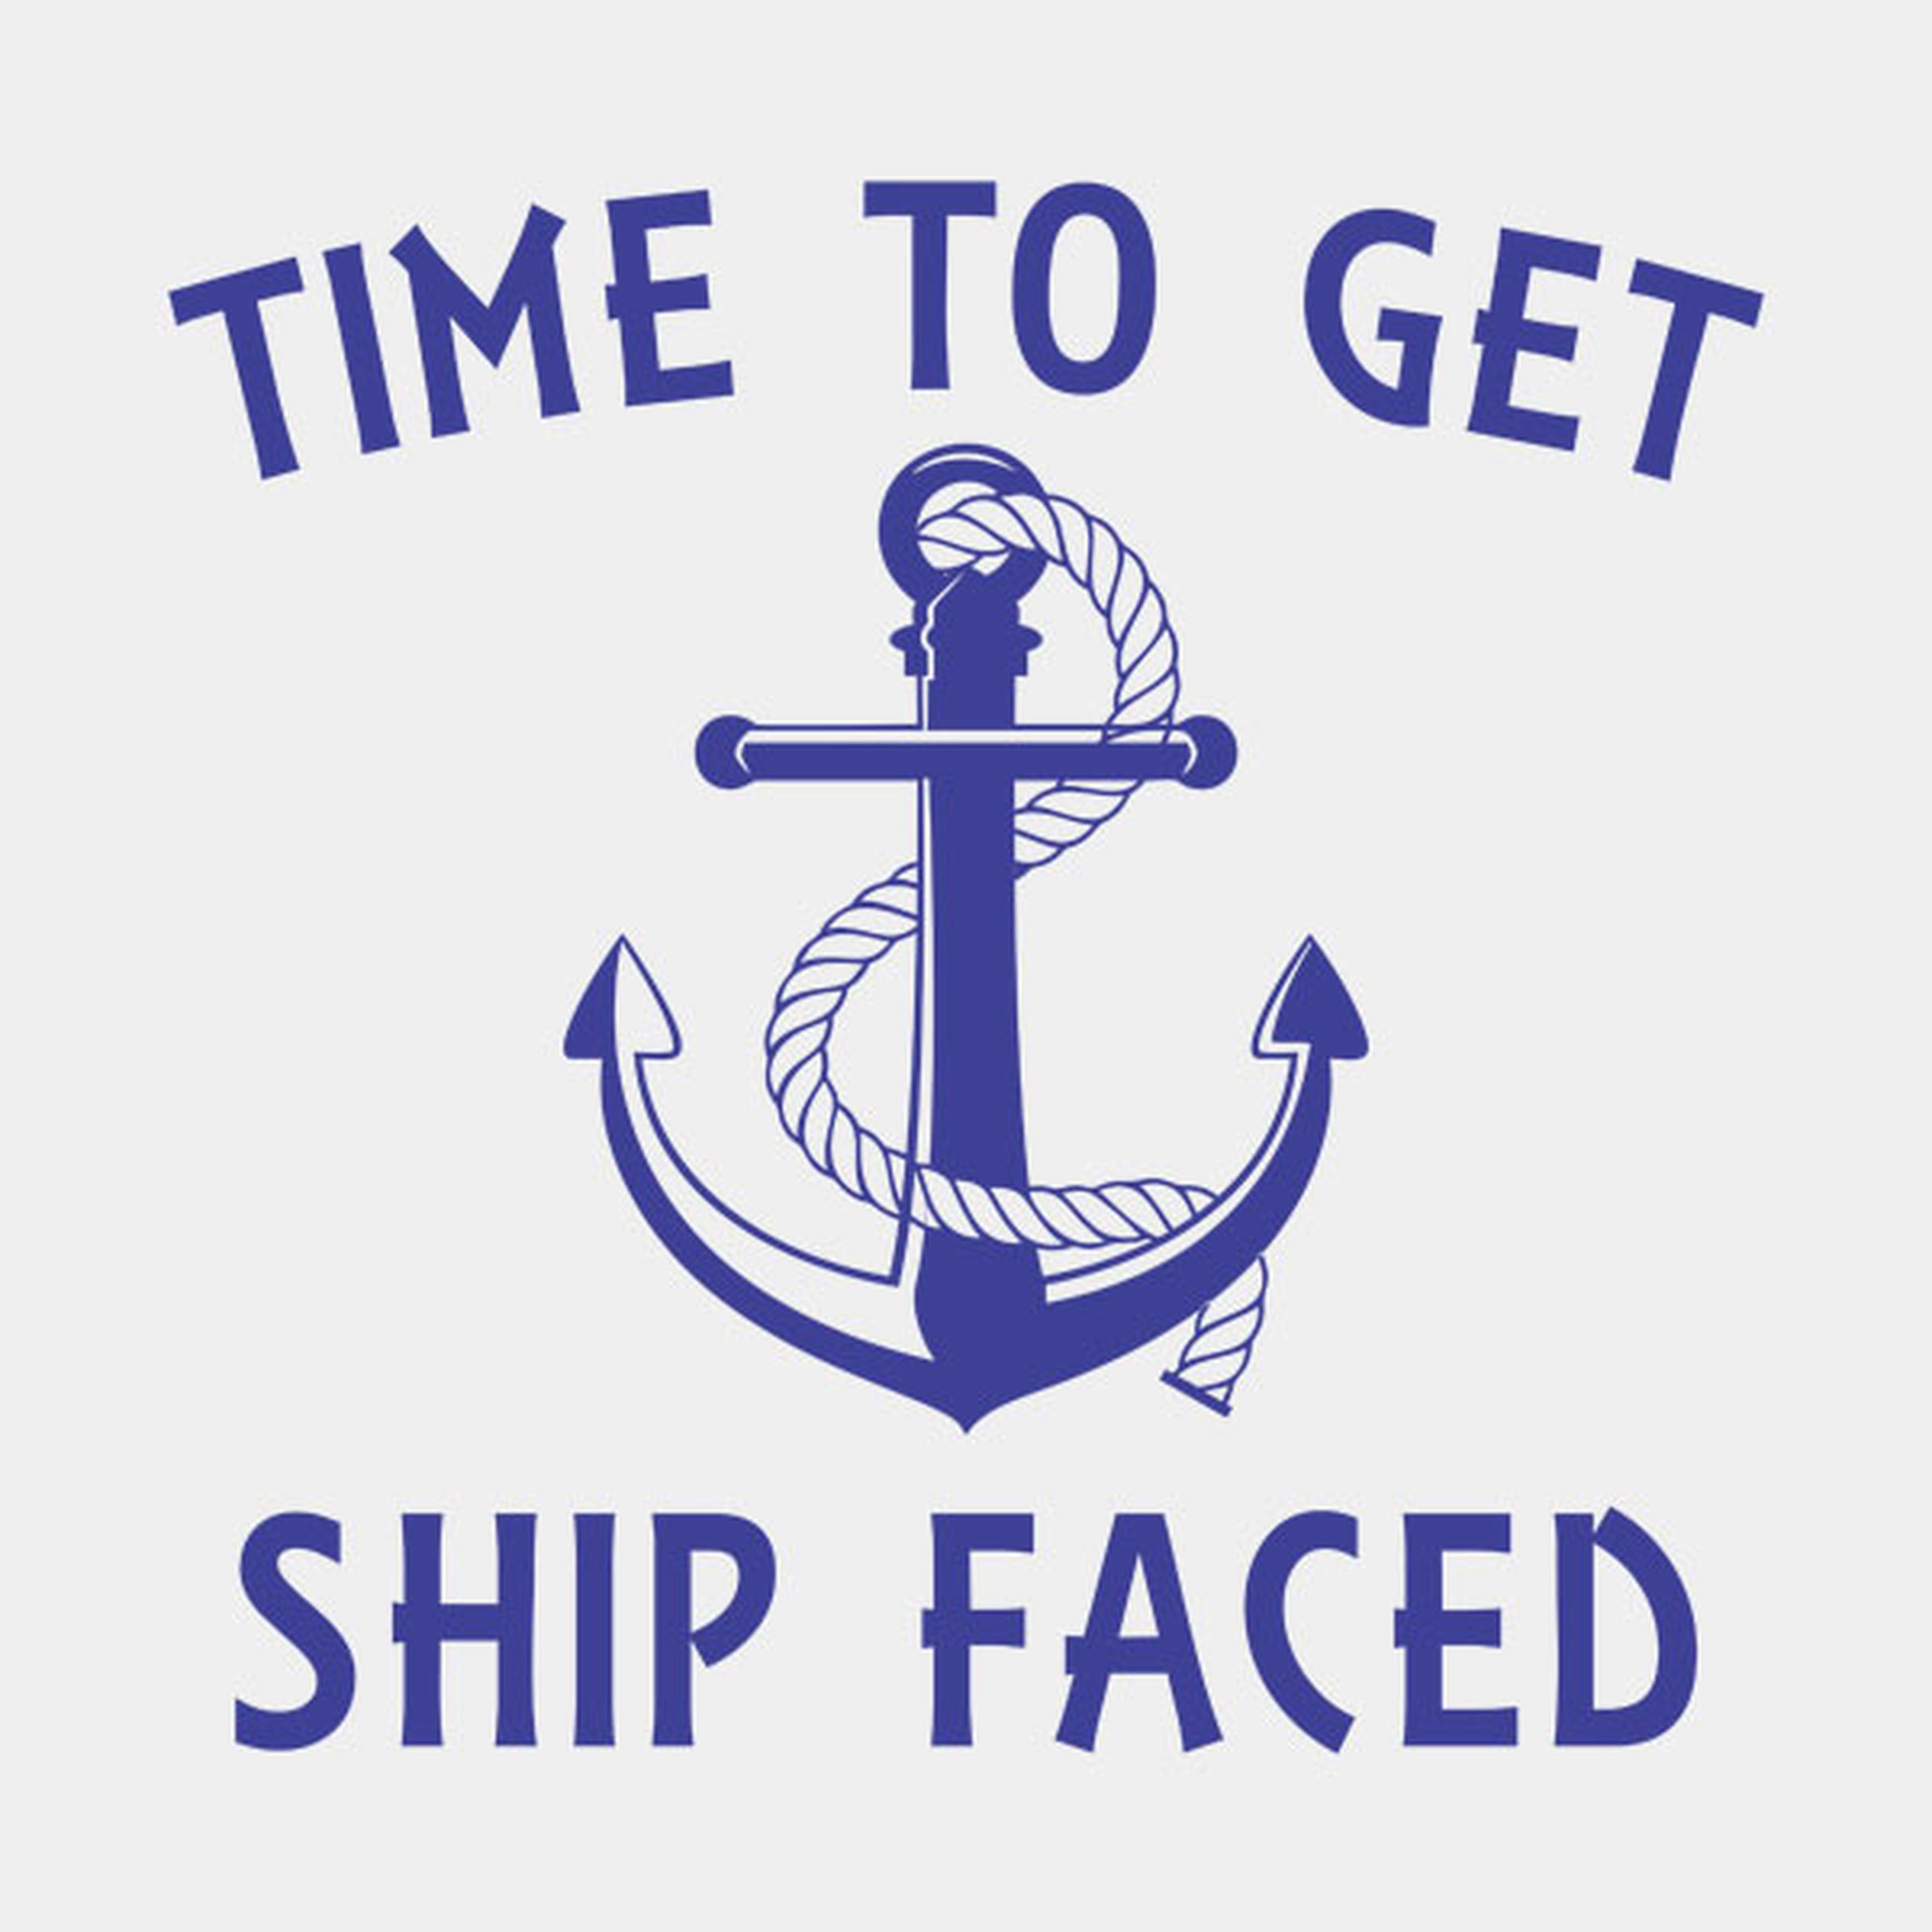 Time to get ship faced - T-shirt